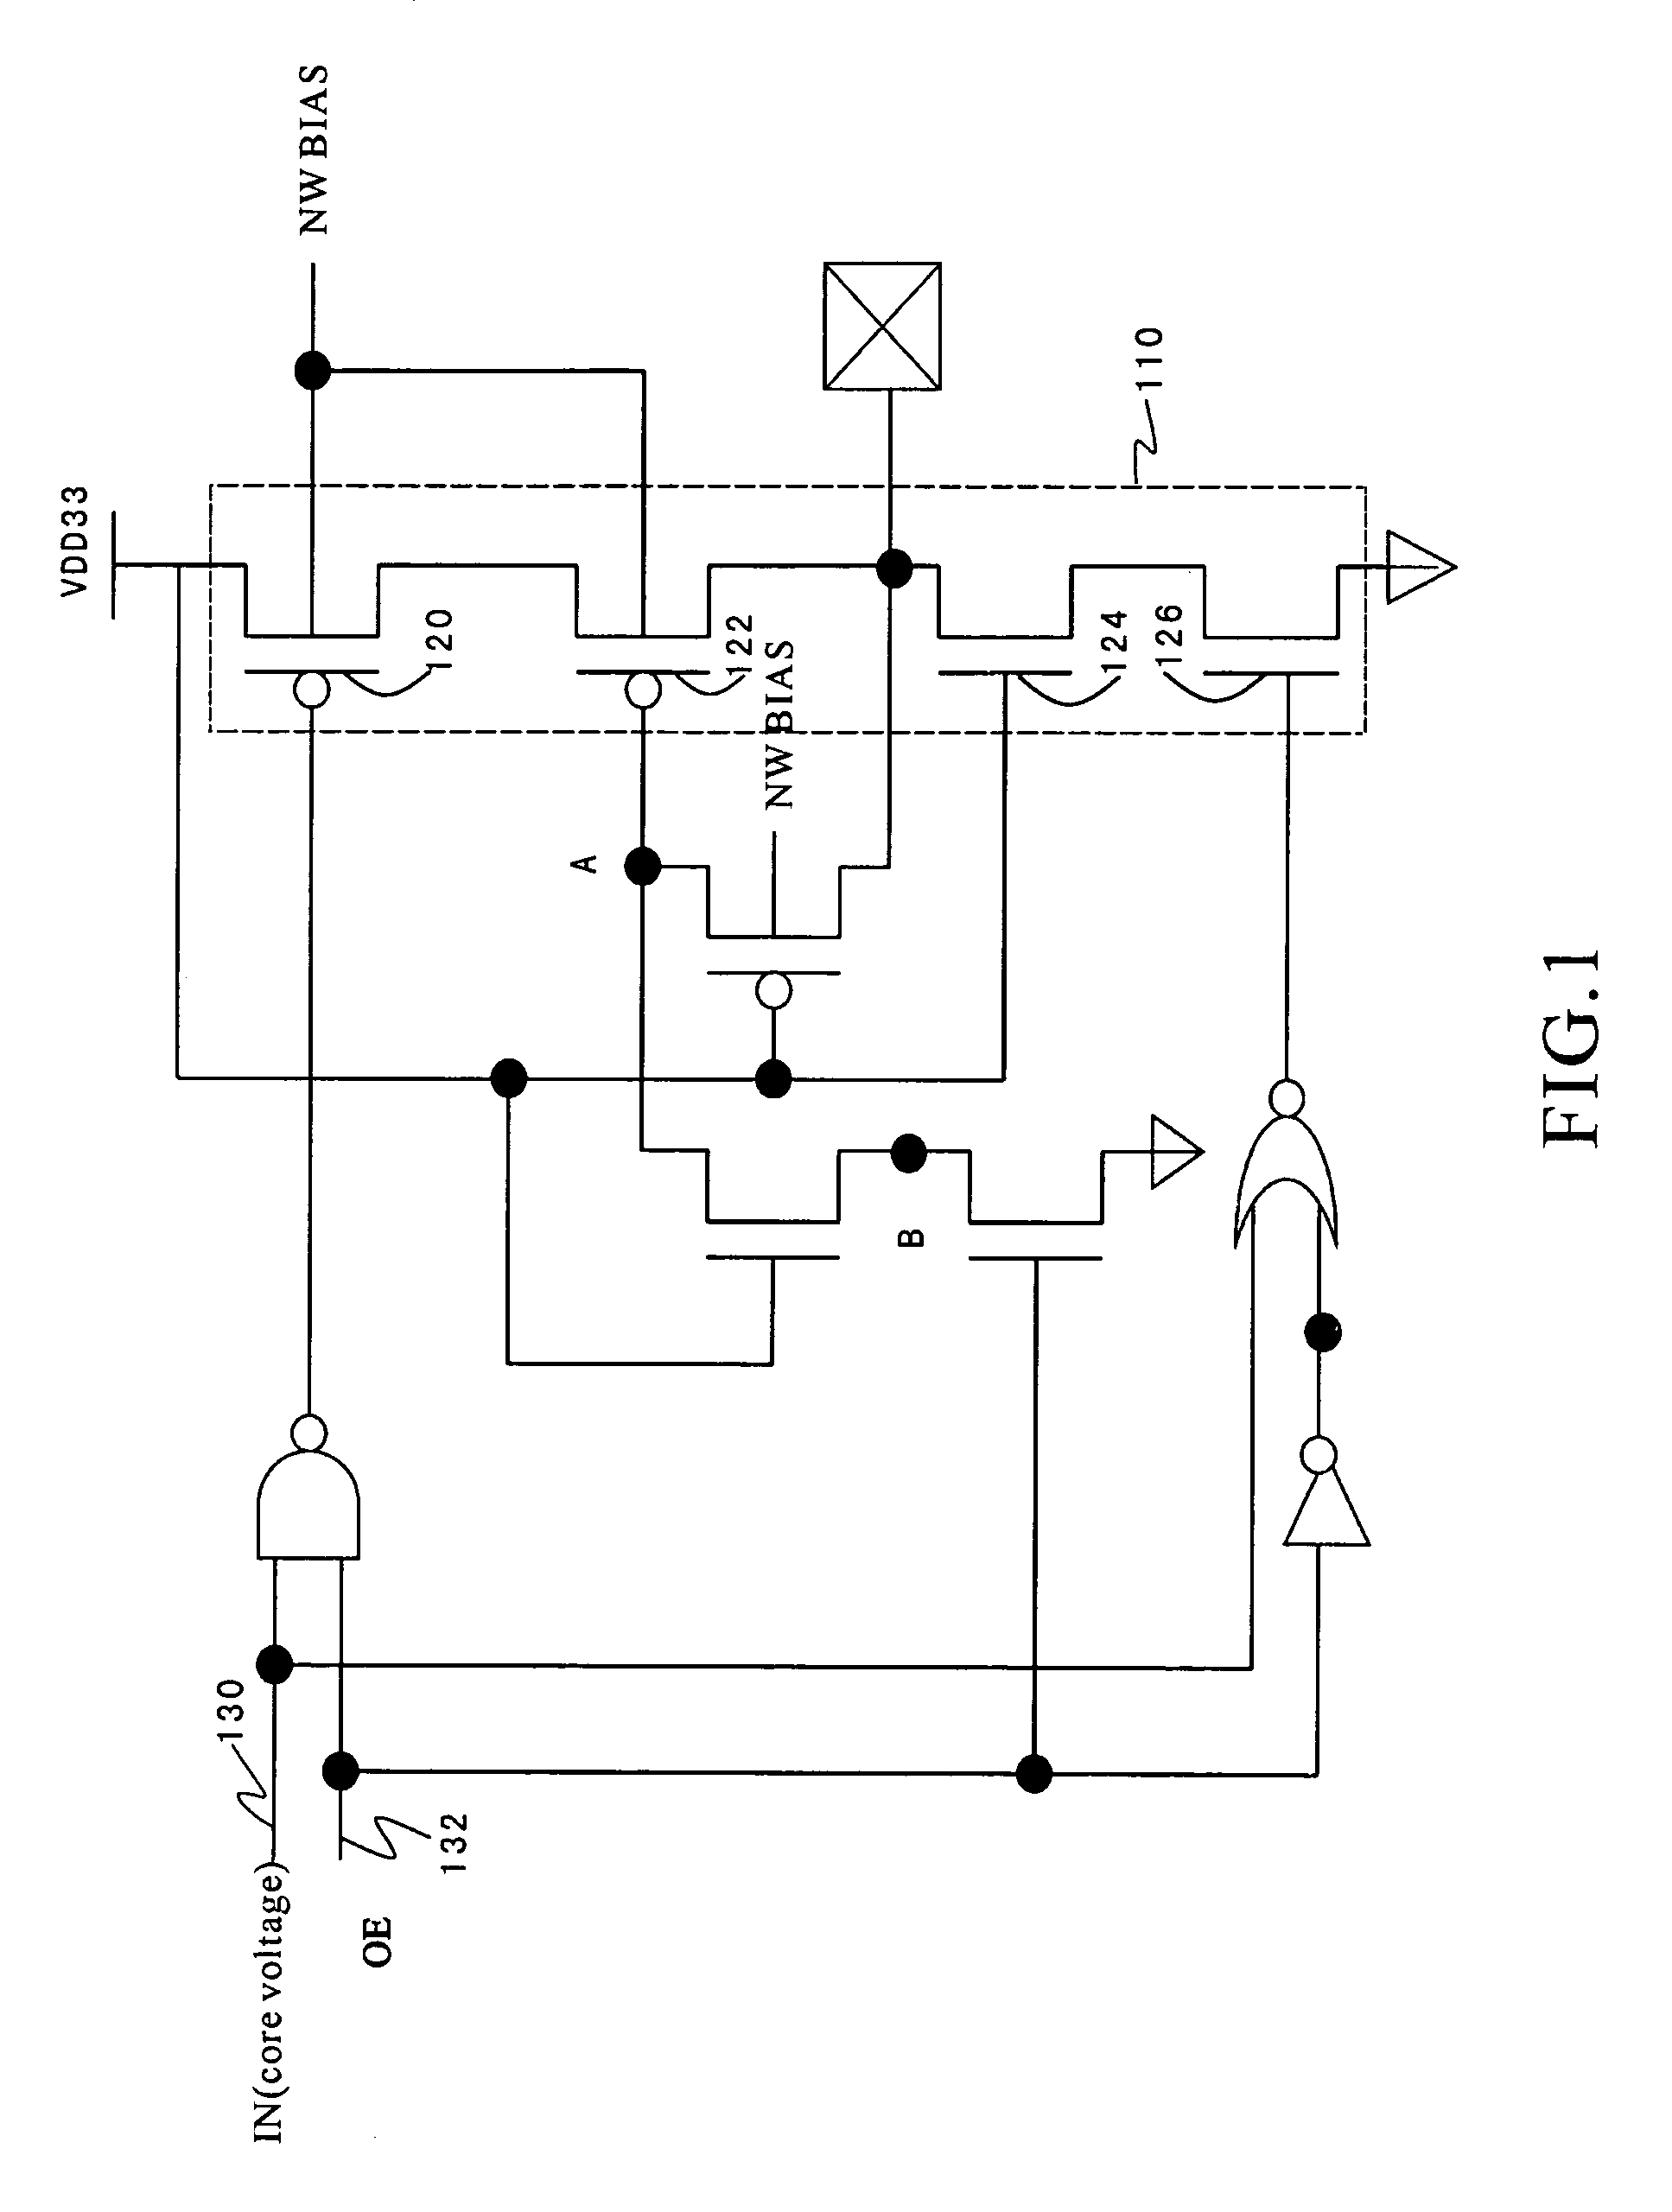 System and method for power-on control of input/output drivers